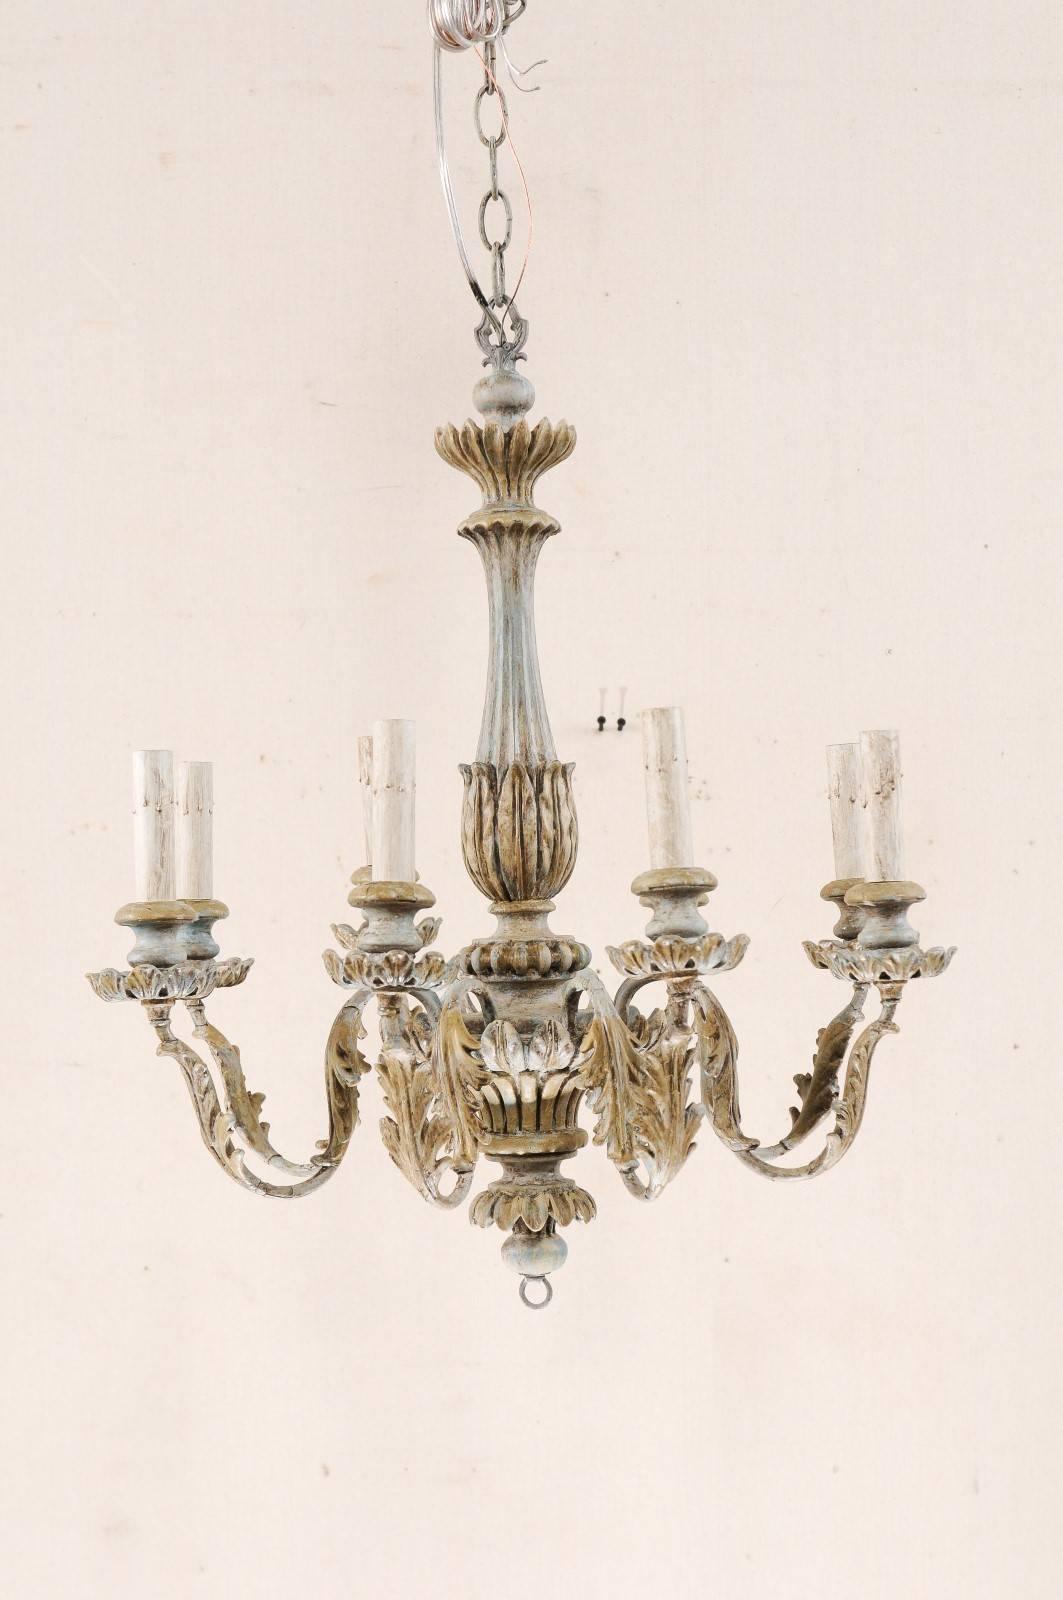 20th Century French Painted Wood and Metal Nicely Carved Chandelier with Acanthus Leaf Decor